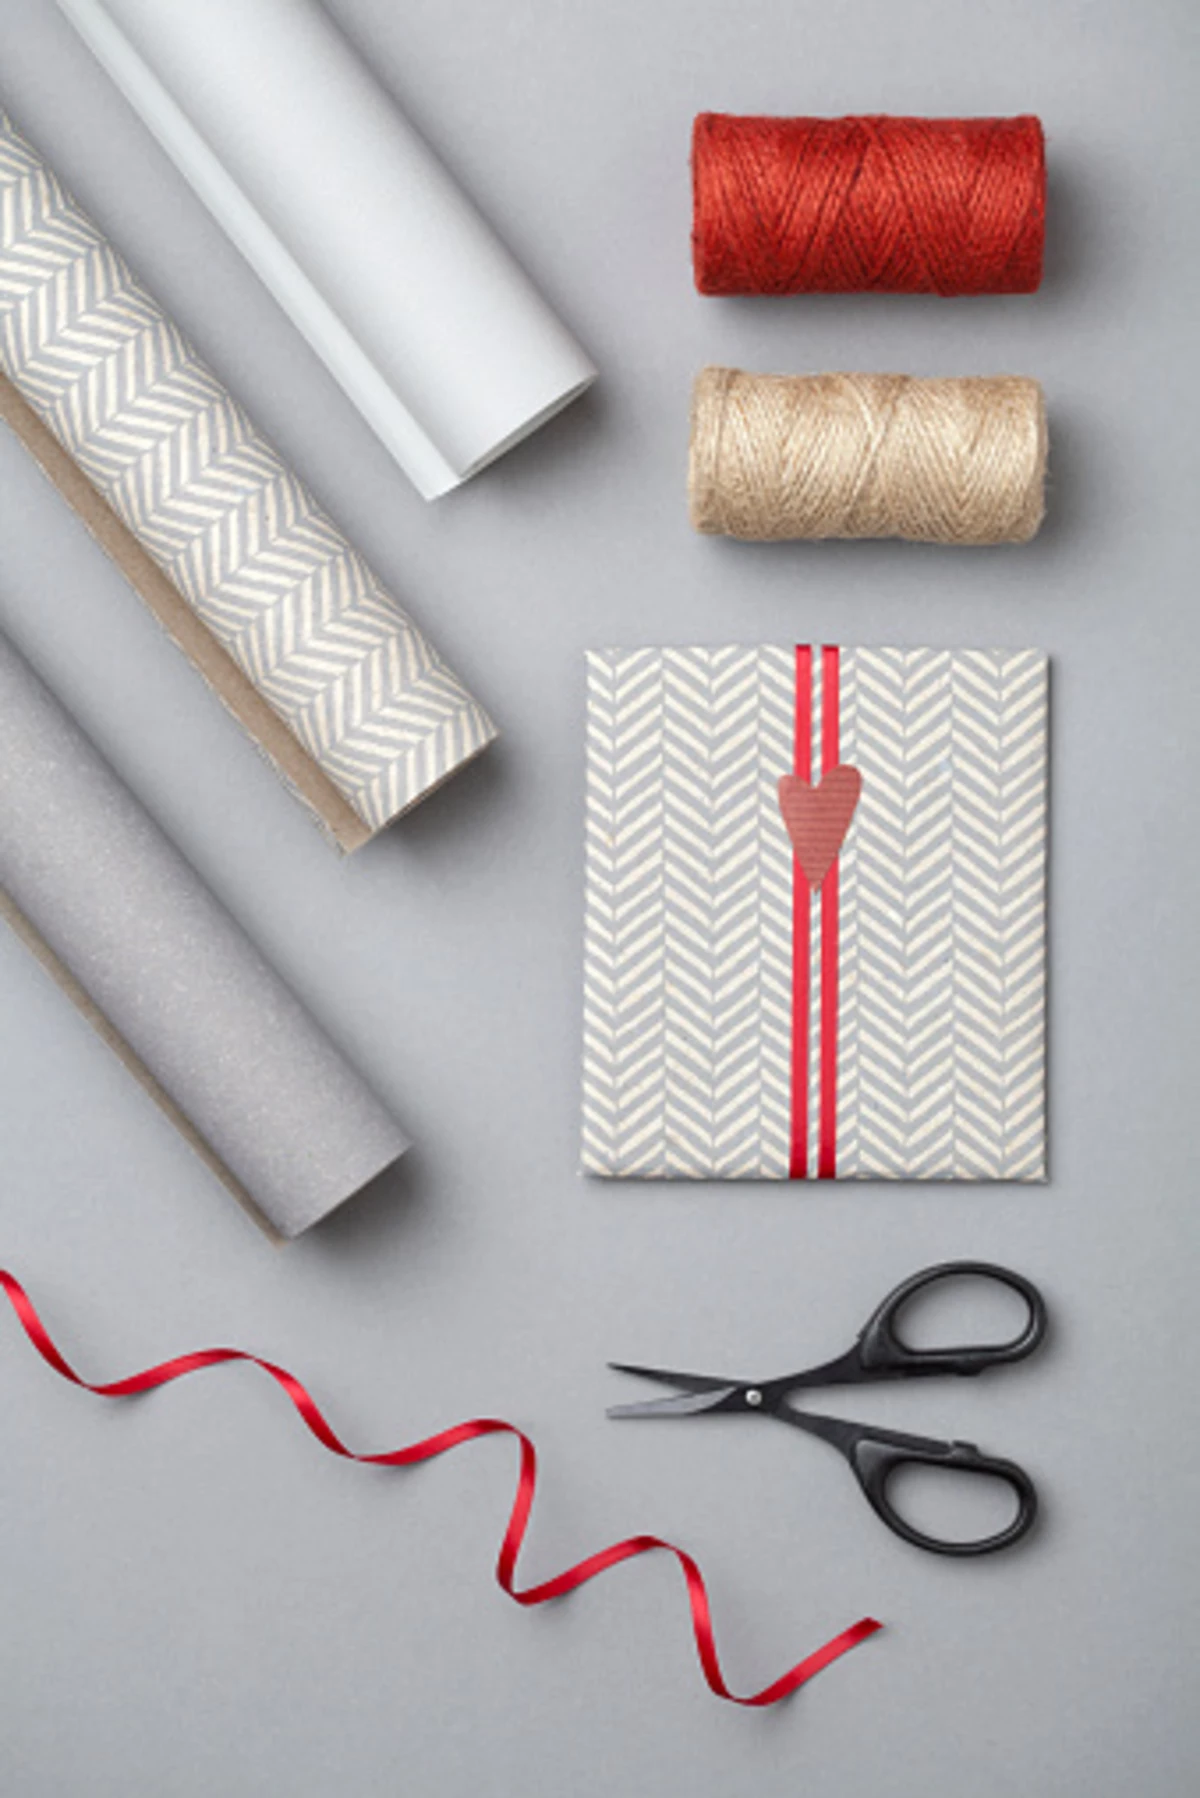 Need Help Gift-Wrapping? Try This Out